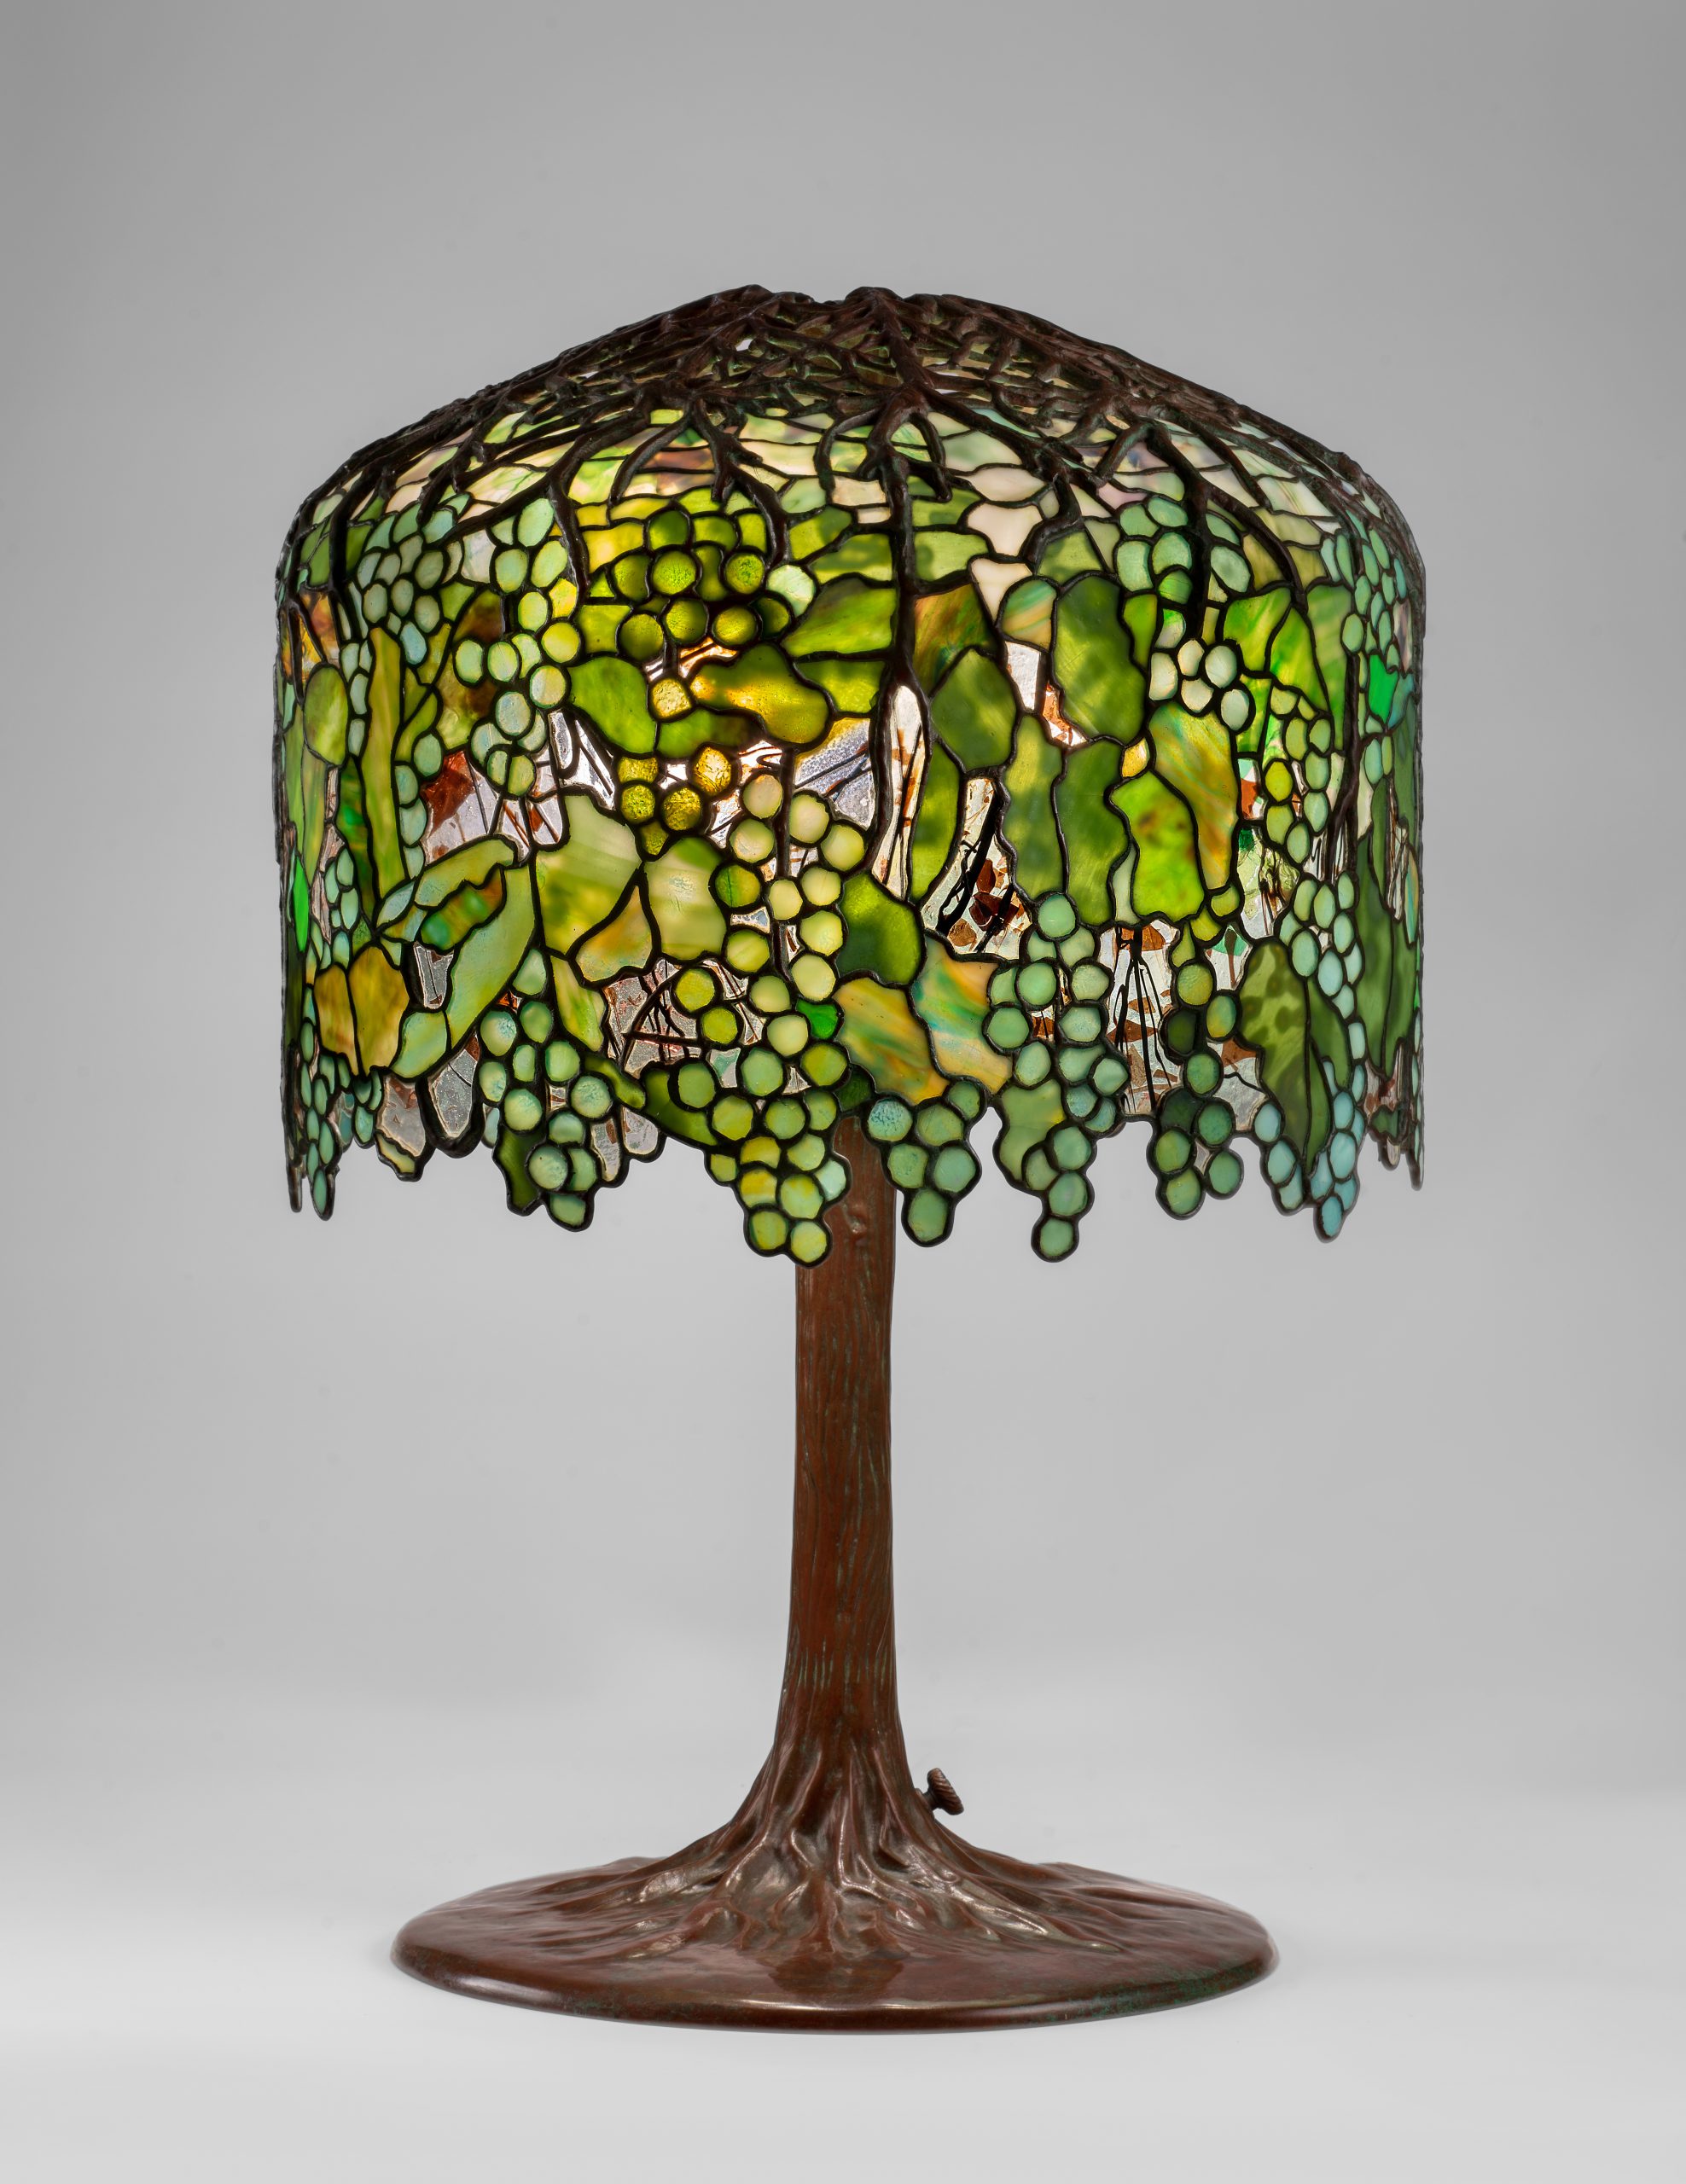 A lit lamp with a brown base that resembles a tree trunk. The base extends into the lampshade as brown branches. The lampshade is made of organic shaped mosaic pieces, in varying shades of green and yellow.